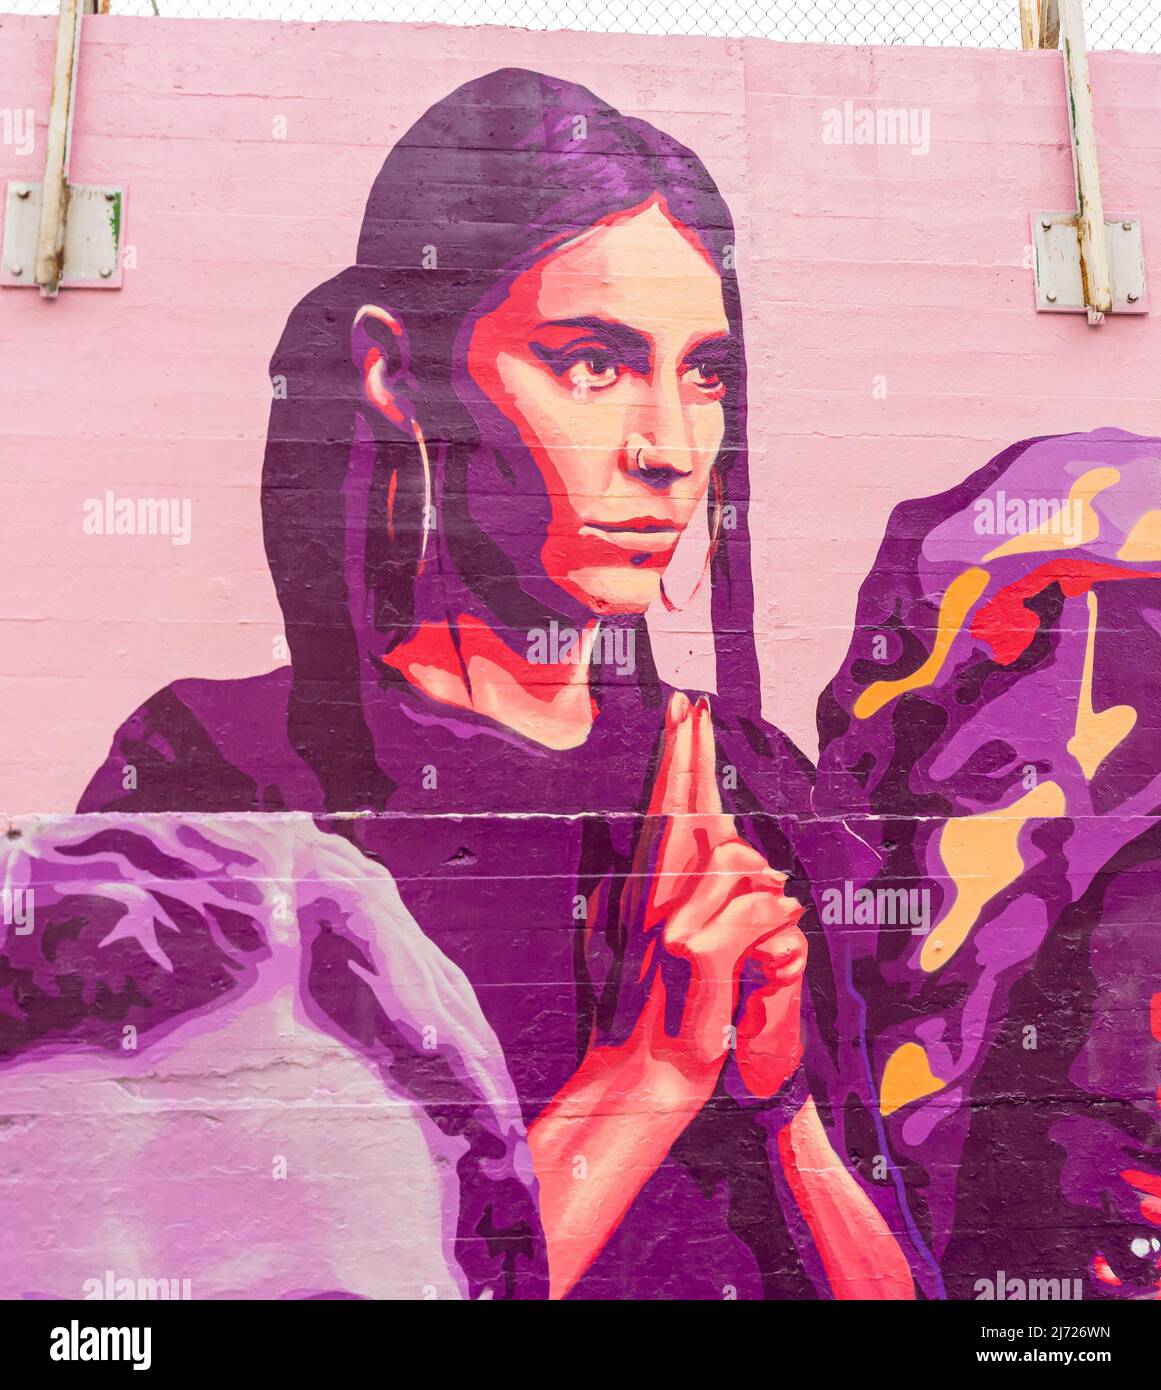 Mural of Spanish poet and rapper Gata Cattana, Concepcion feminist mural  La unión hace la fuerza,  on the wall in, Madrid Spain Stock Photo